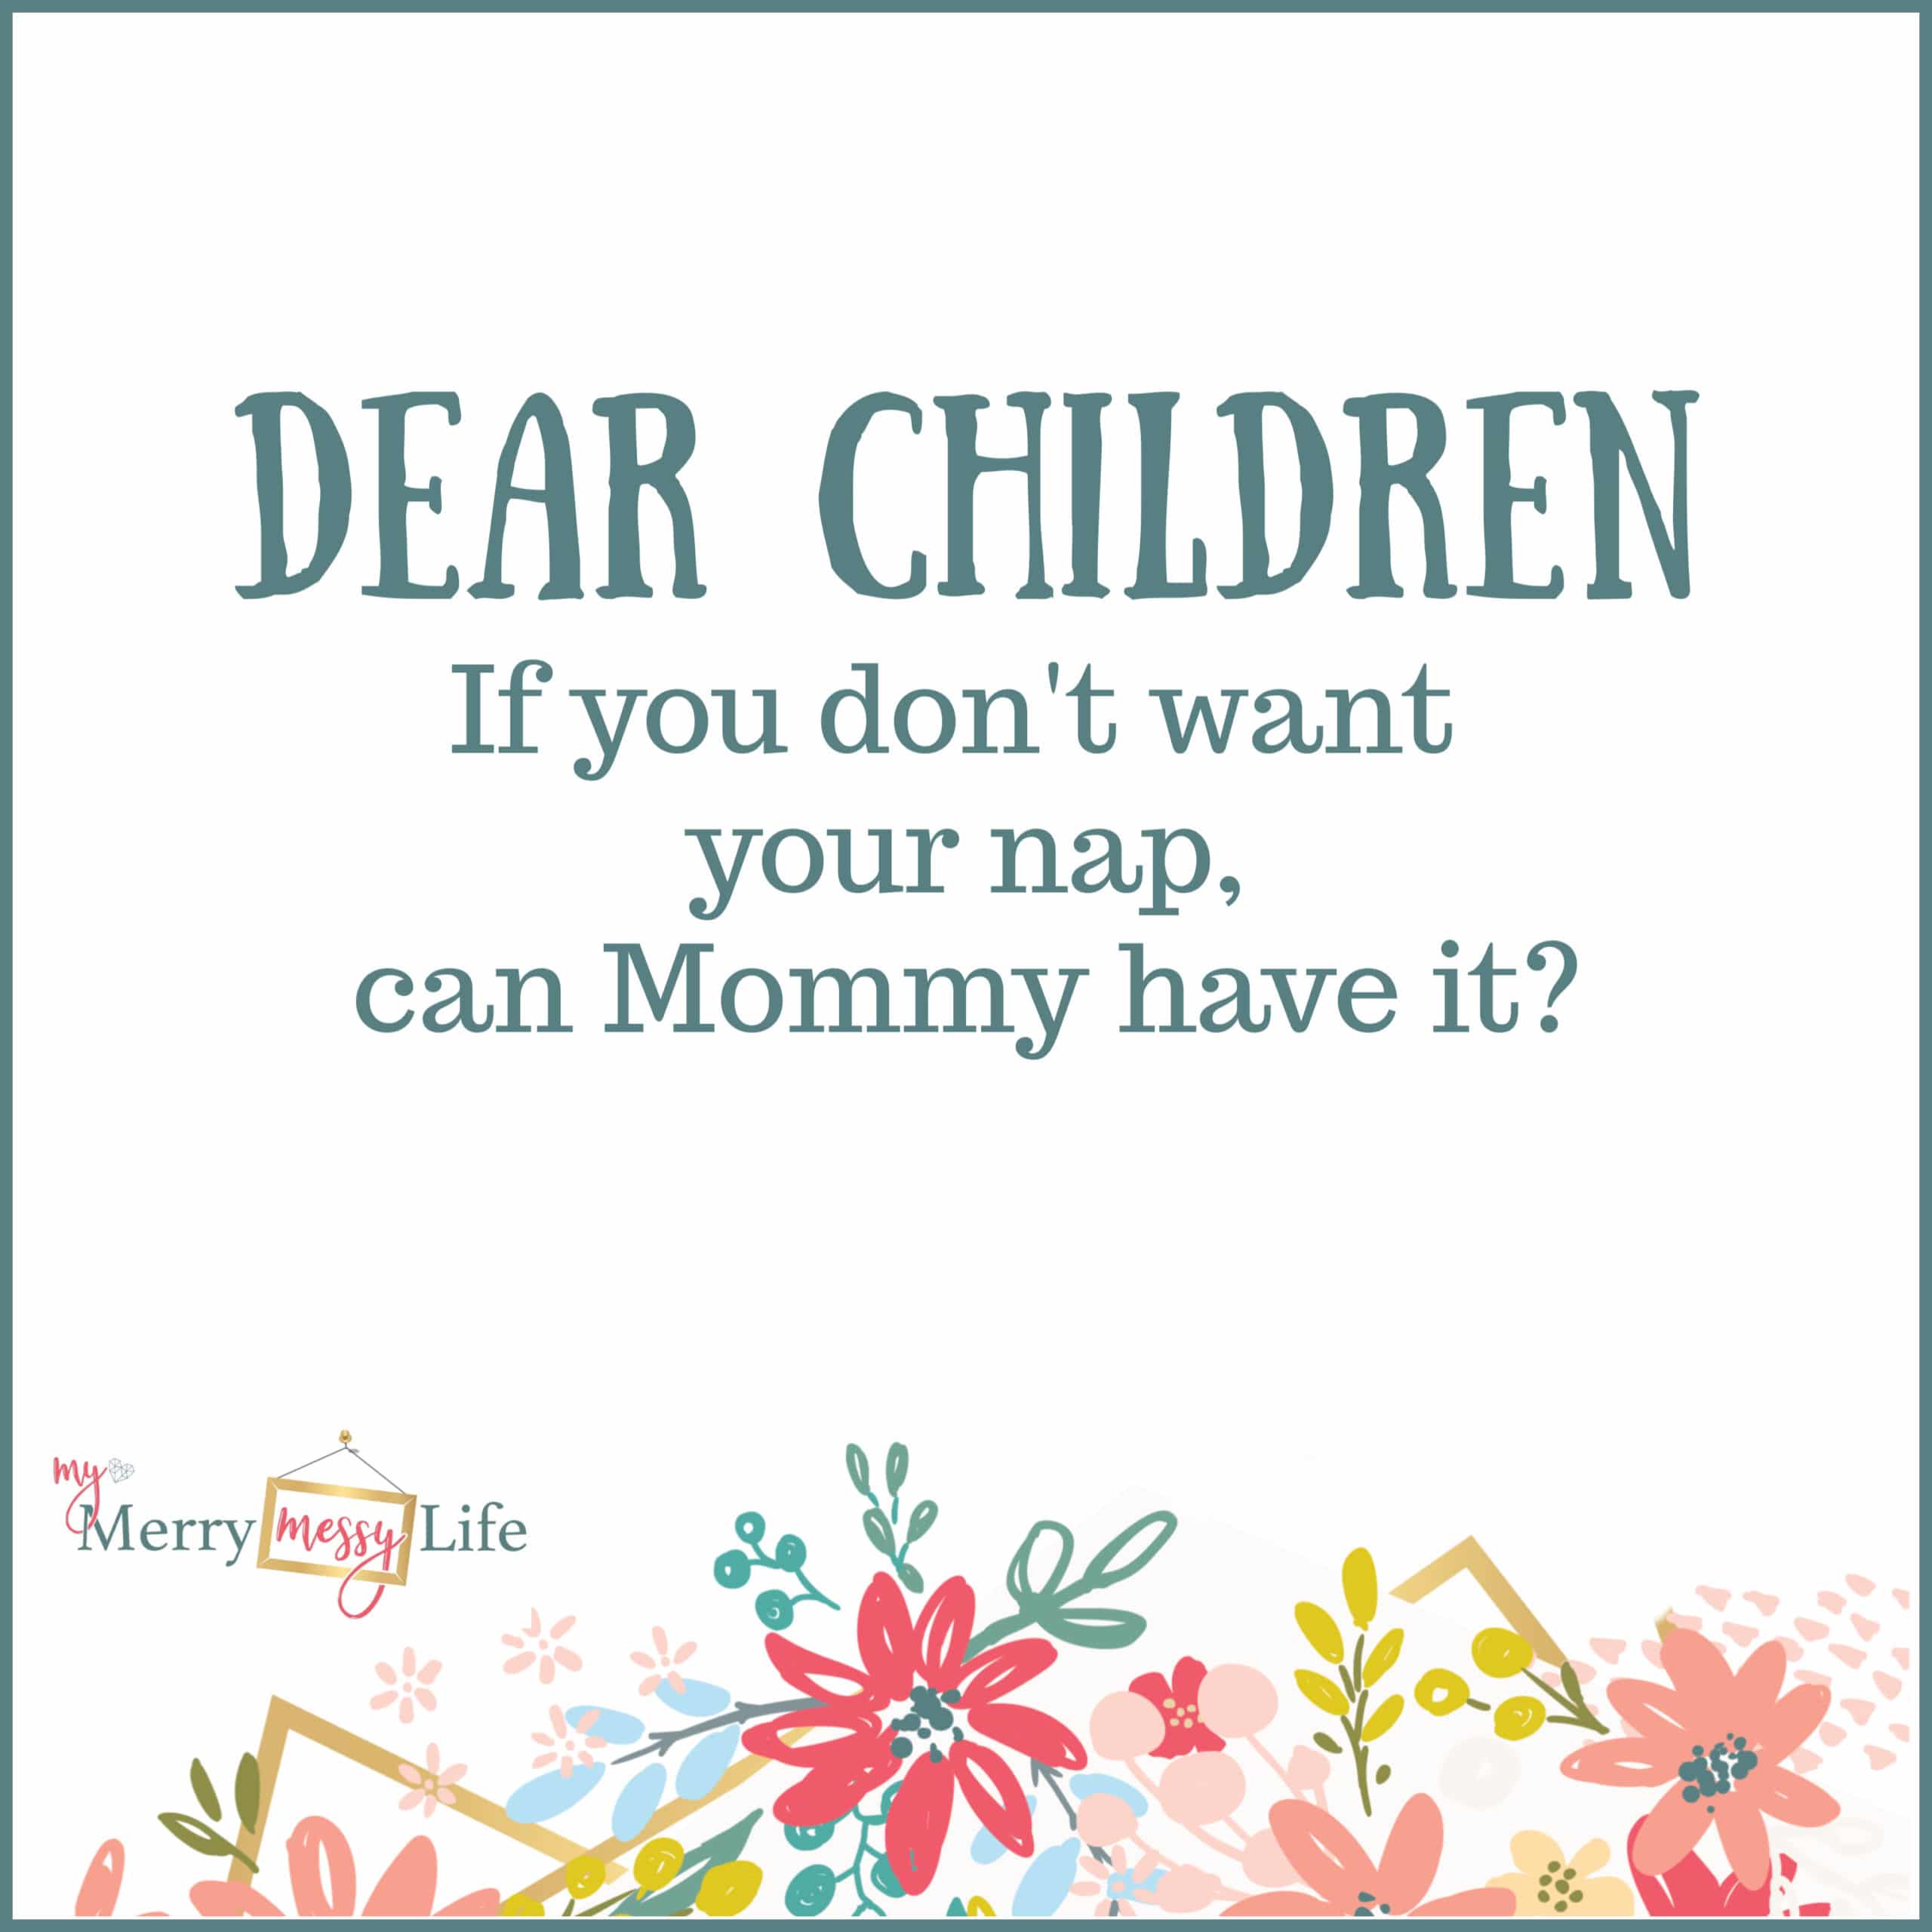 Dear Children, if you don't want your nap, can Mommy have it? Funny Mom Memes